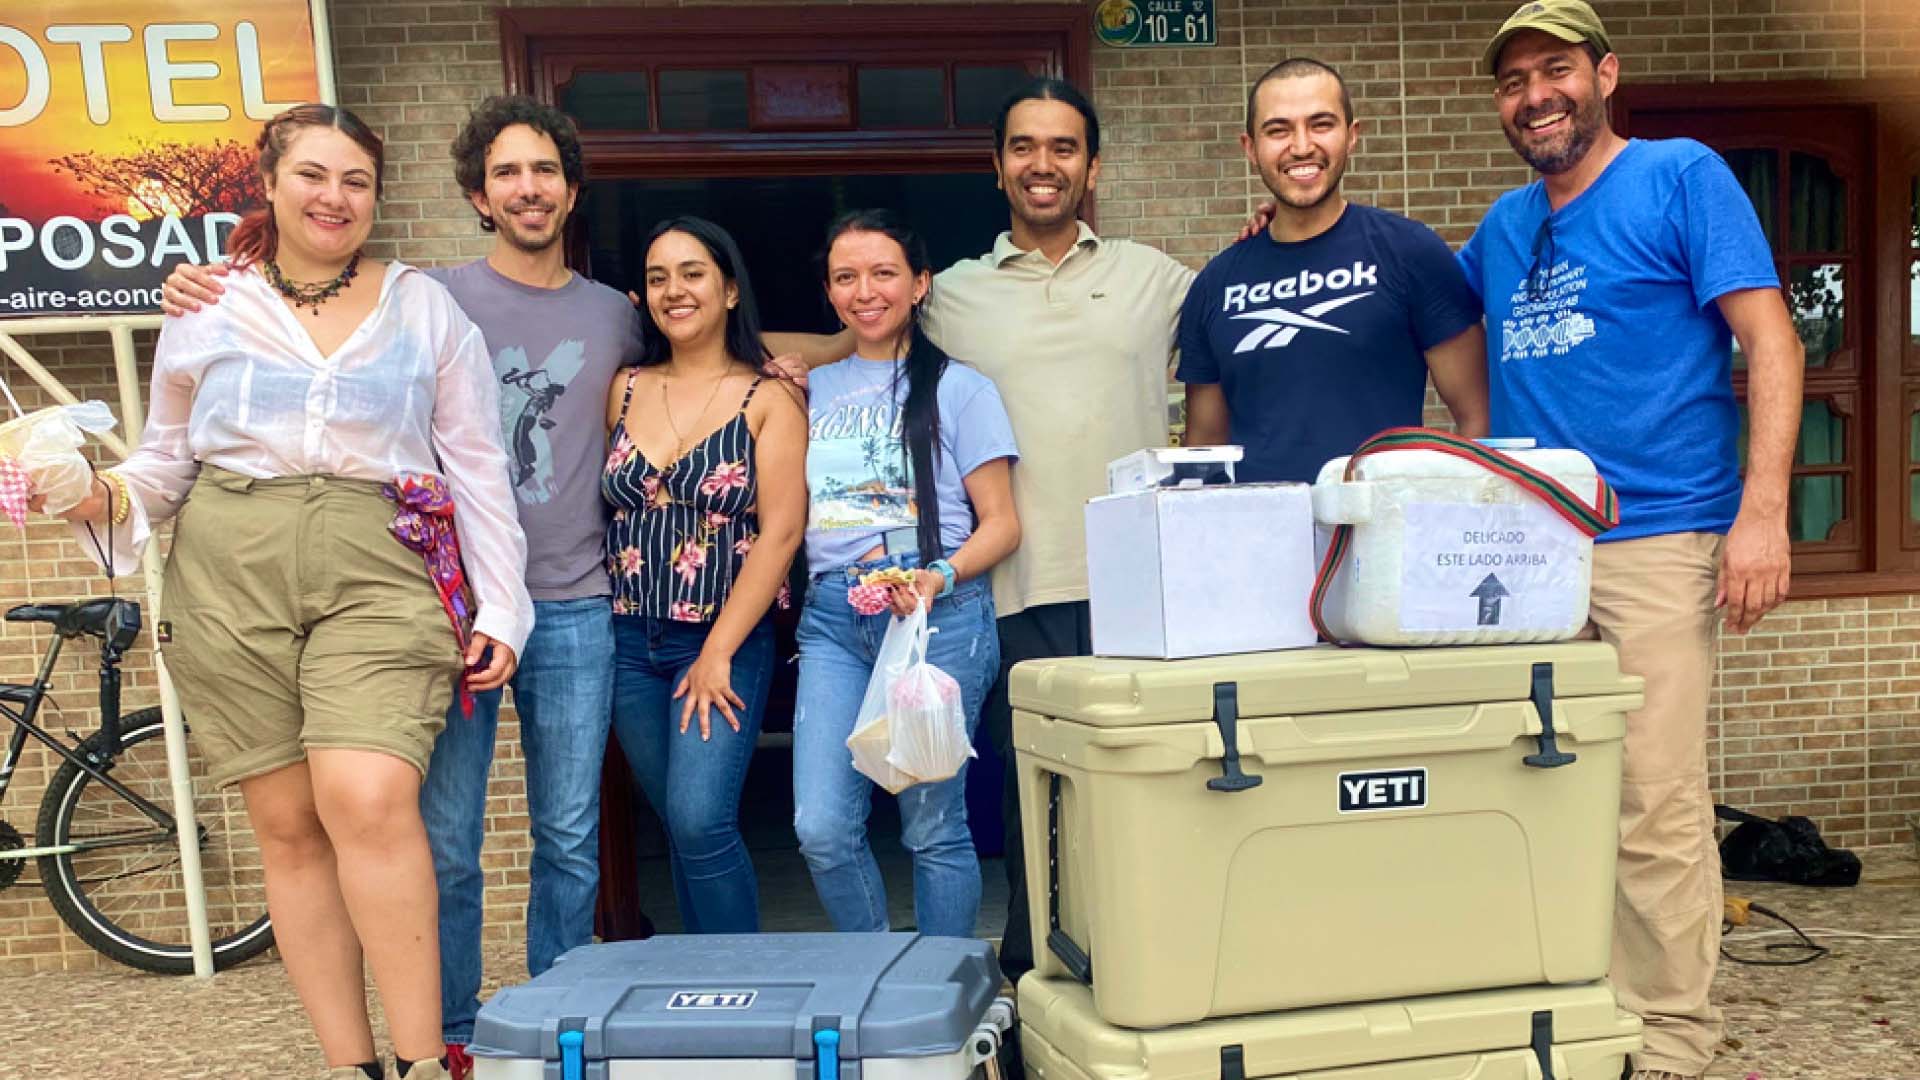 Seven members of the research team smiling outside of a building with three large coolers and two ice boxes stacked in front of them